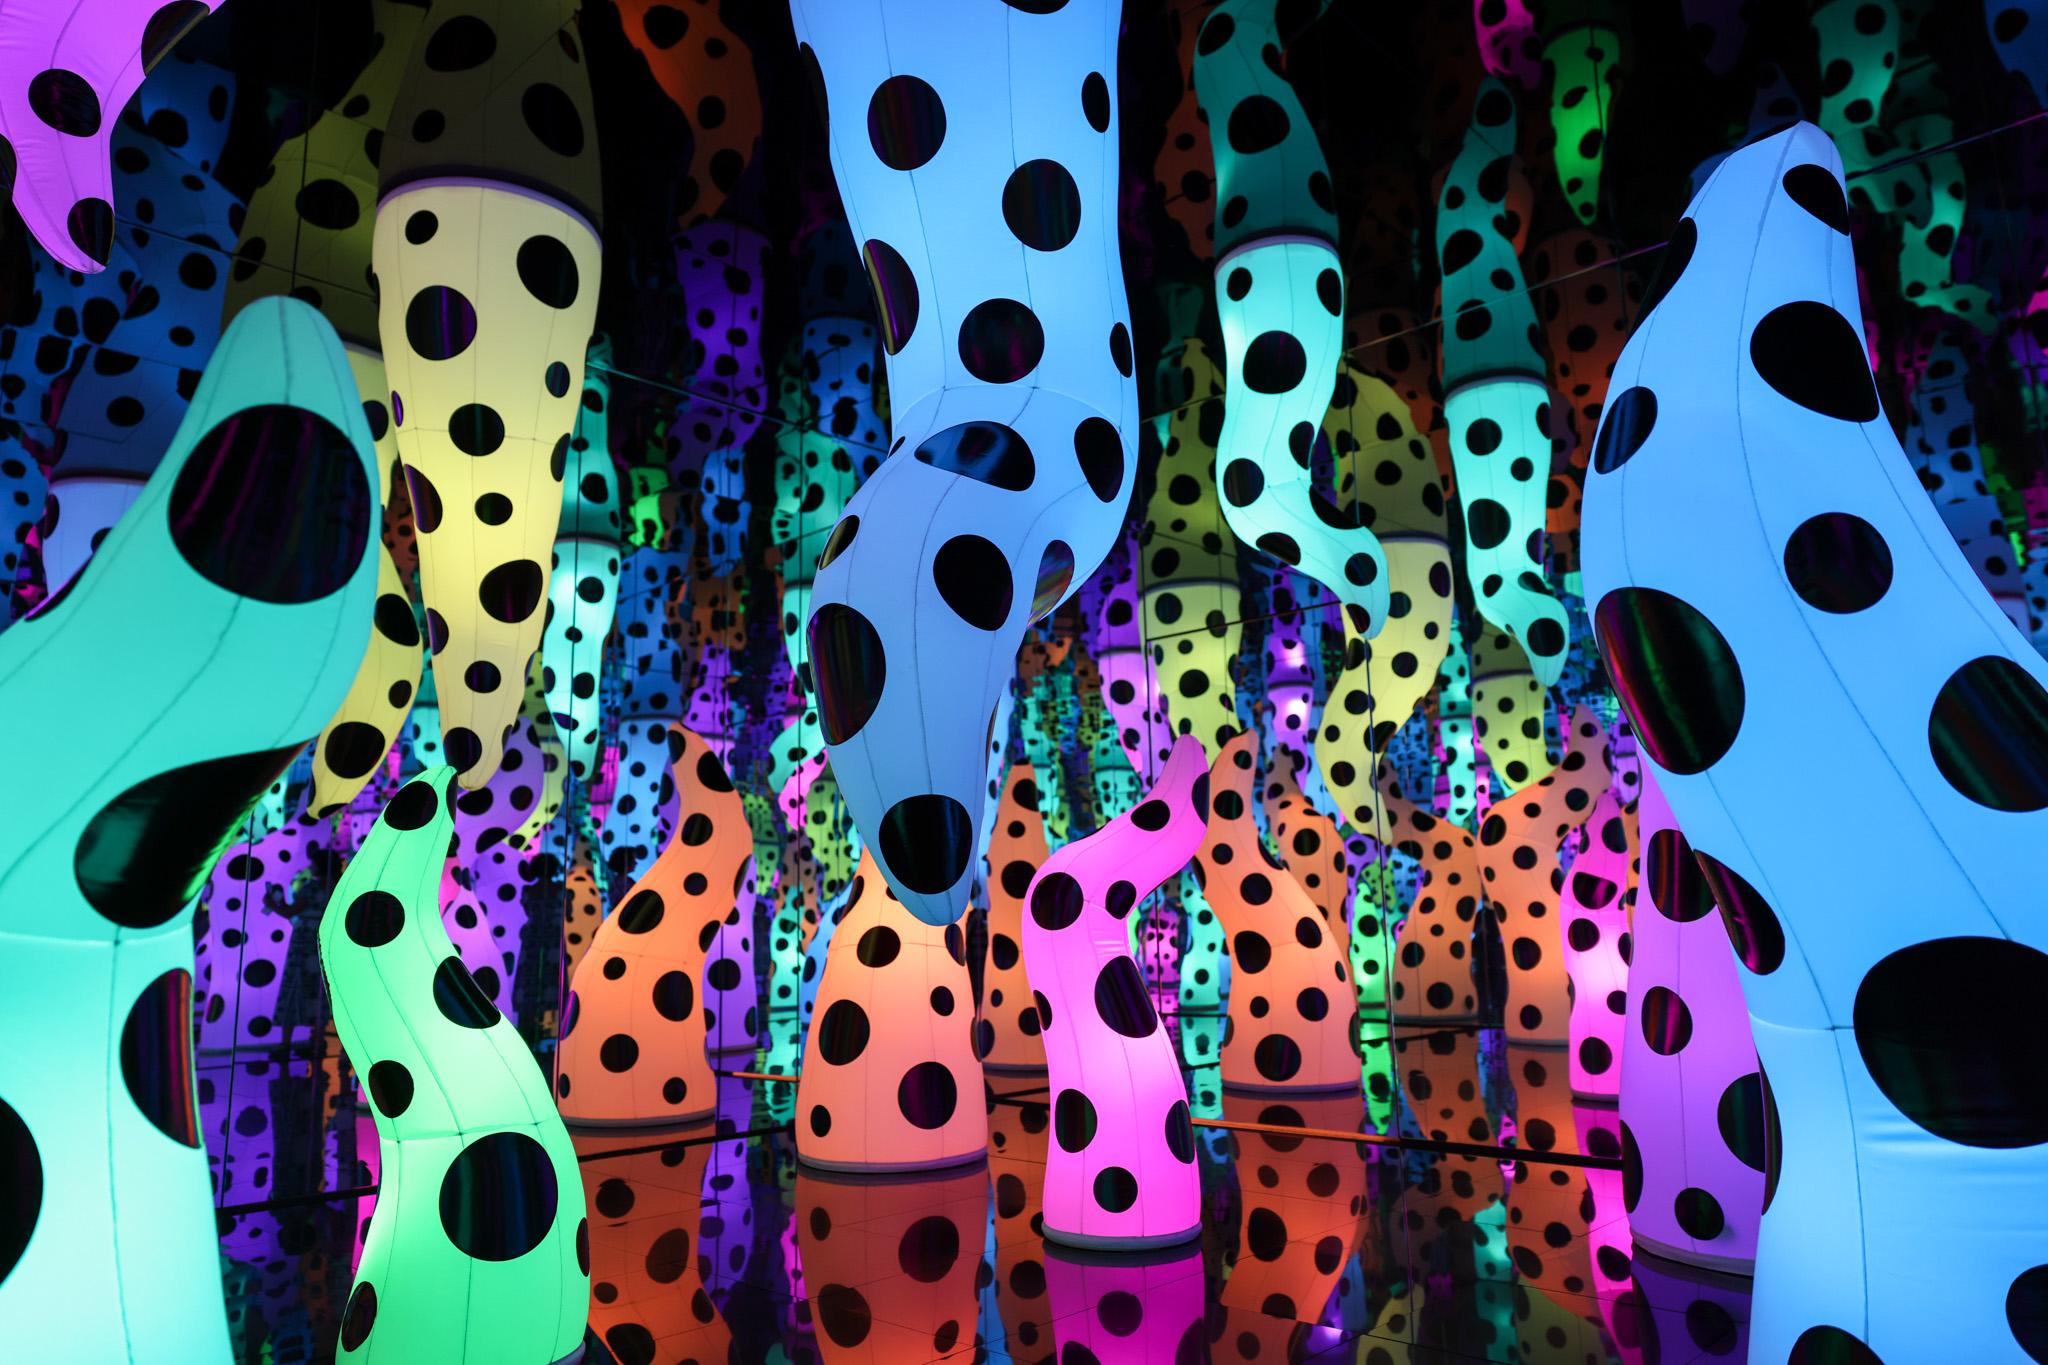 Yayoi Kusama’s Instagrammable Infinity Rooms on Display in San Francisco